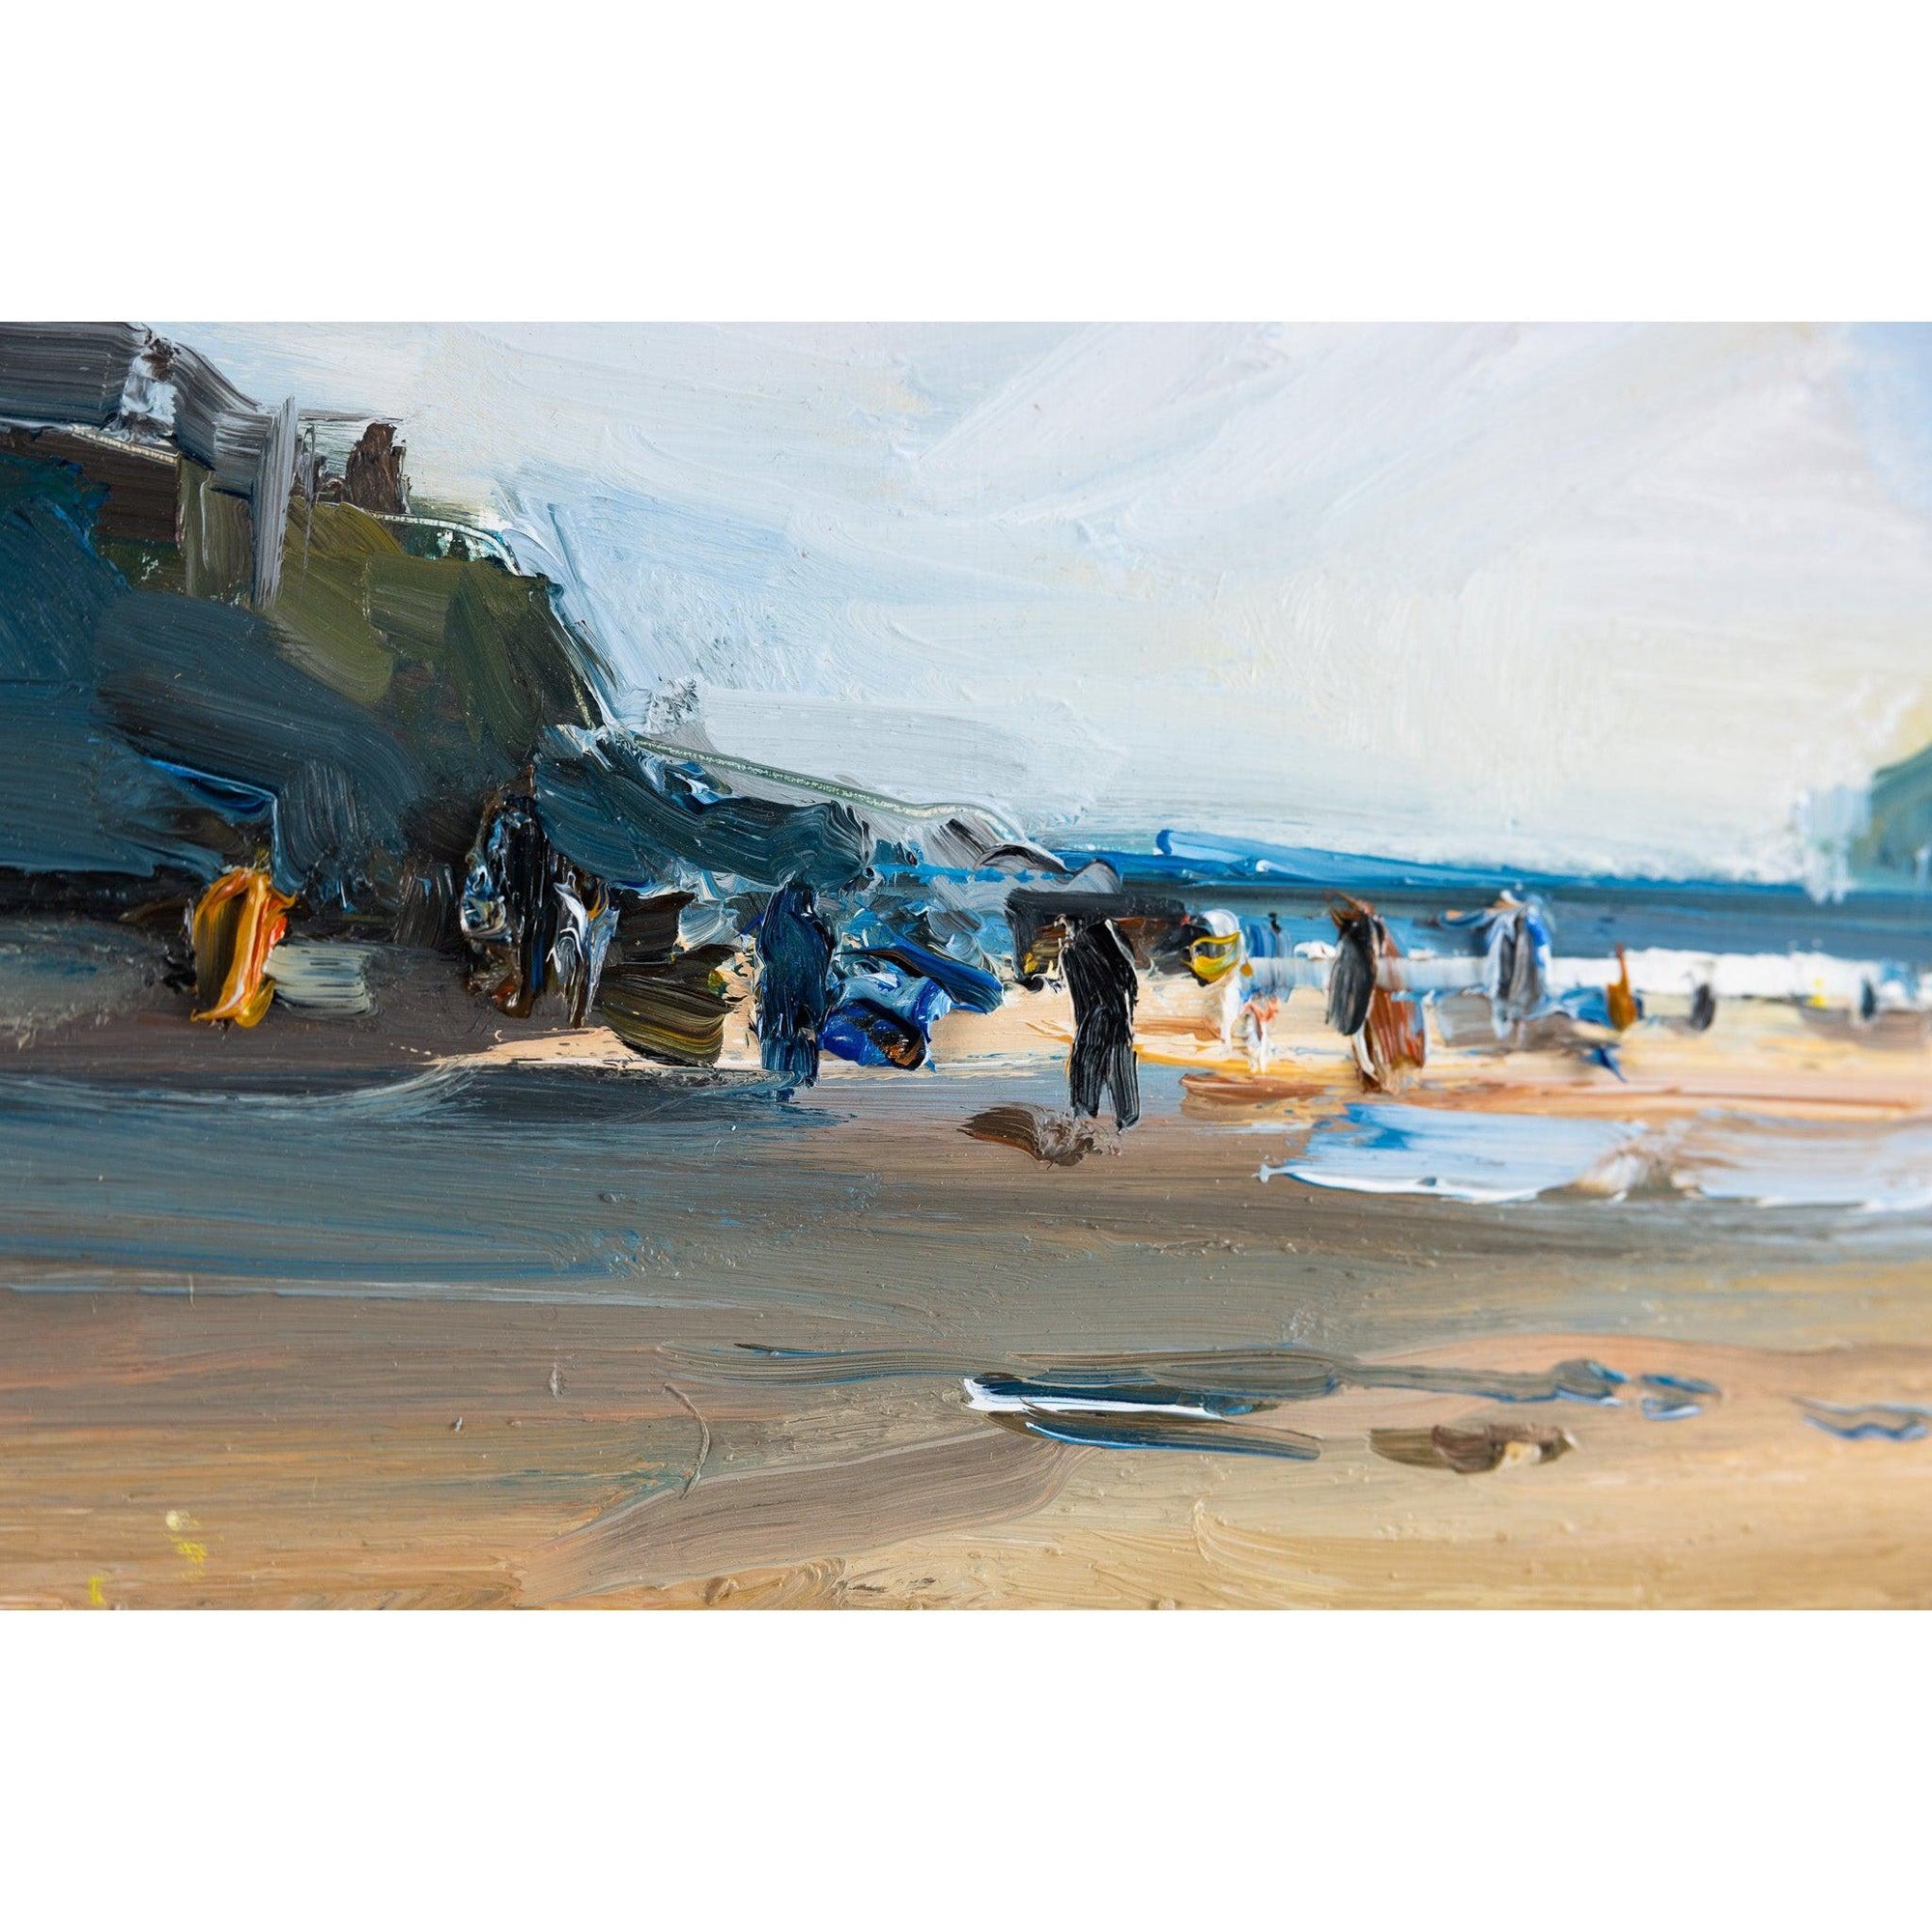 'A Late Summers Day, Treyarnon Bay' oil on board original by David Atkins, available at Padstow Gallery, Cornwall